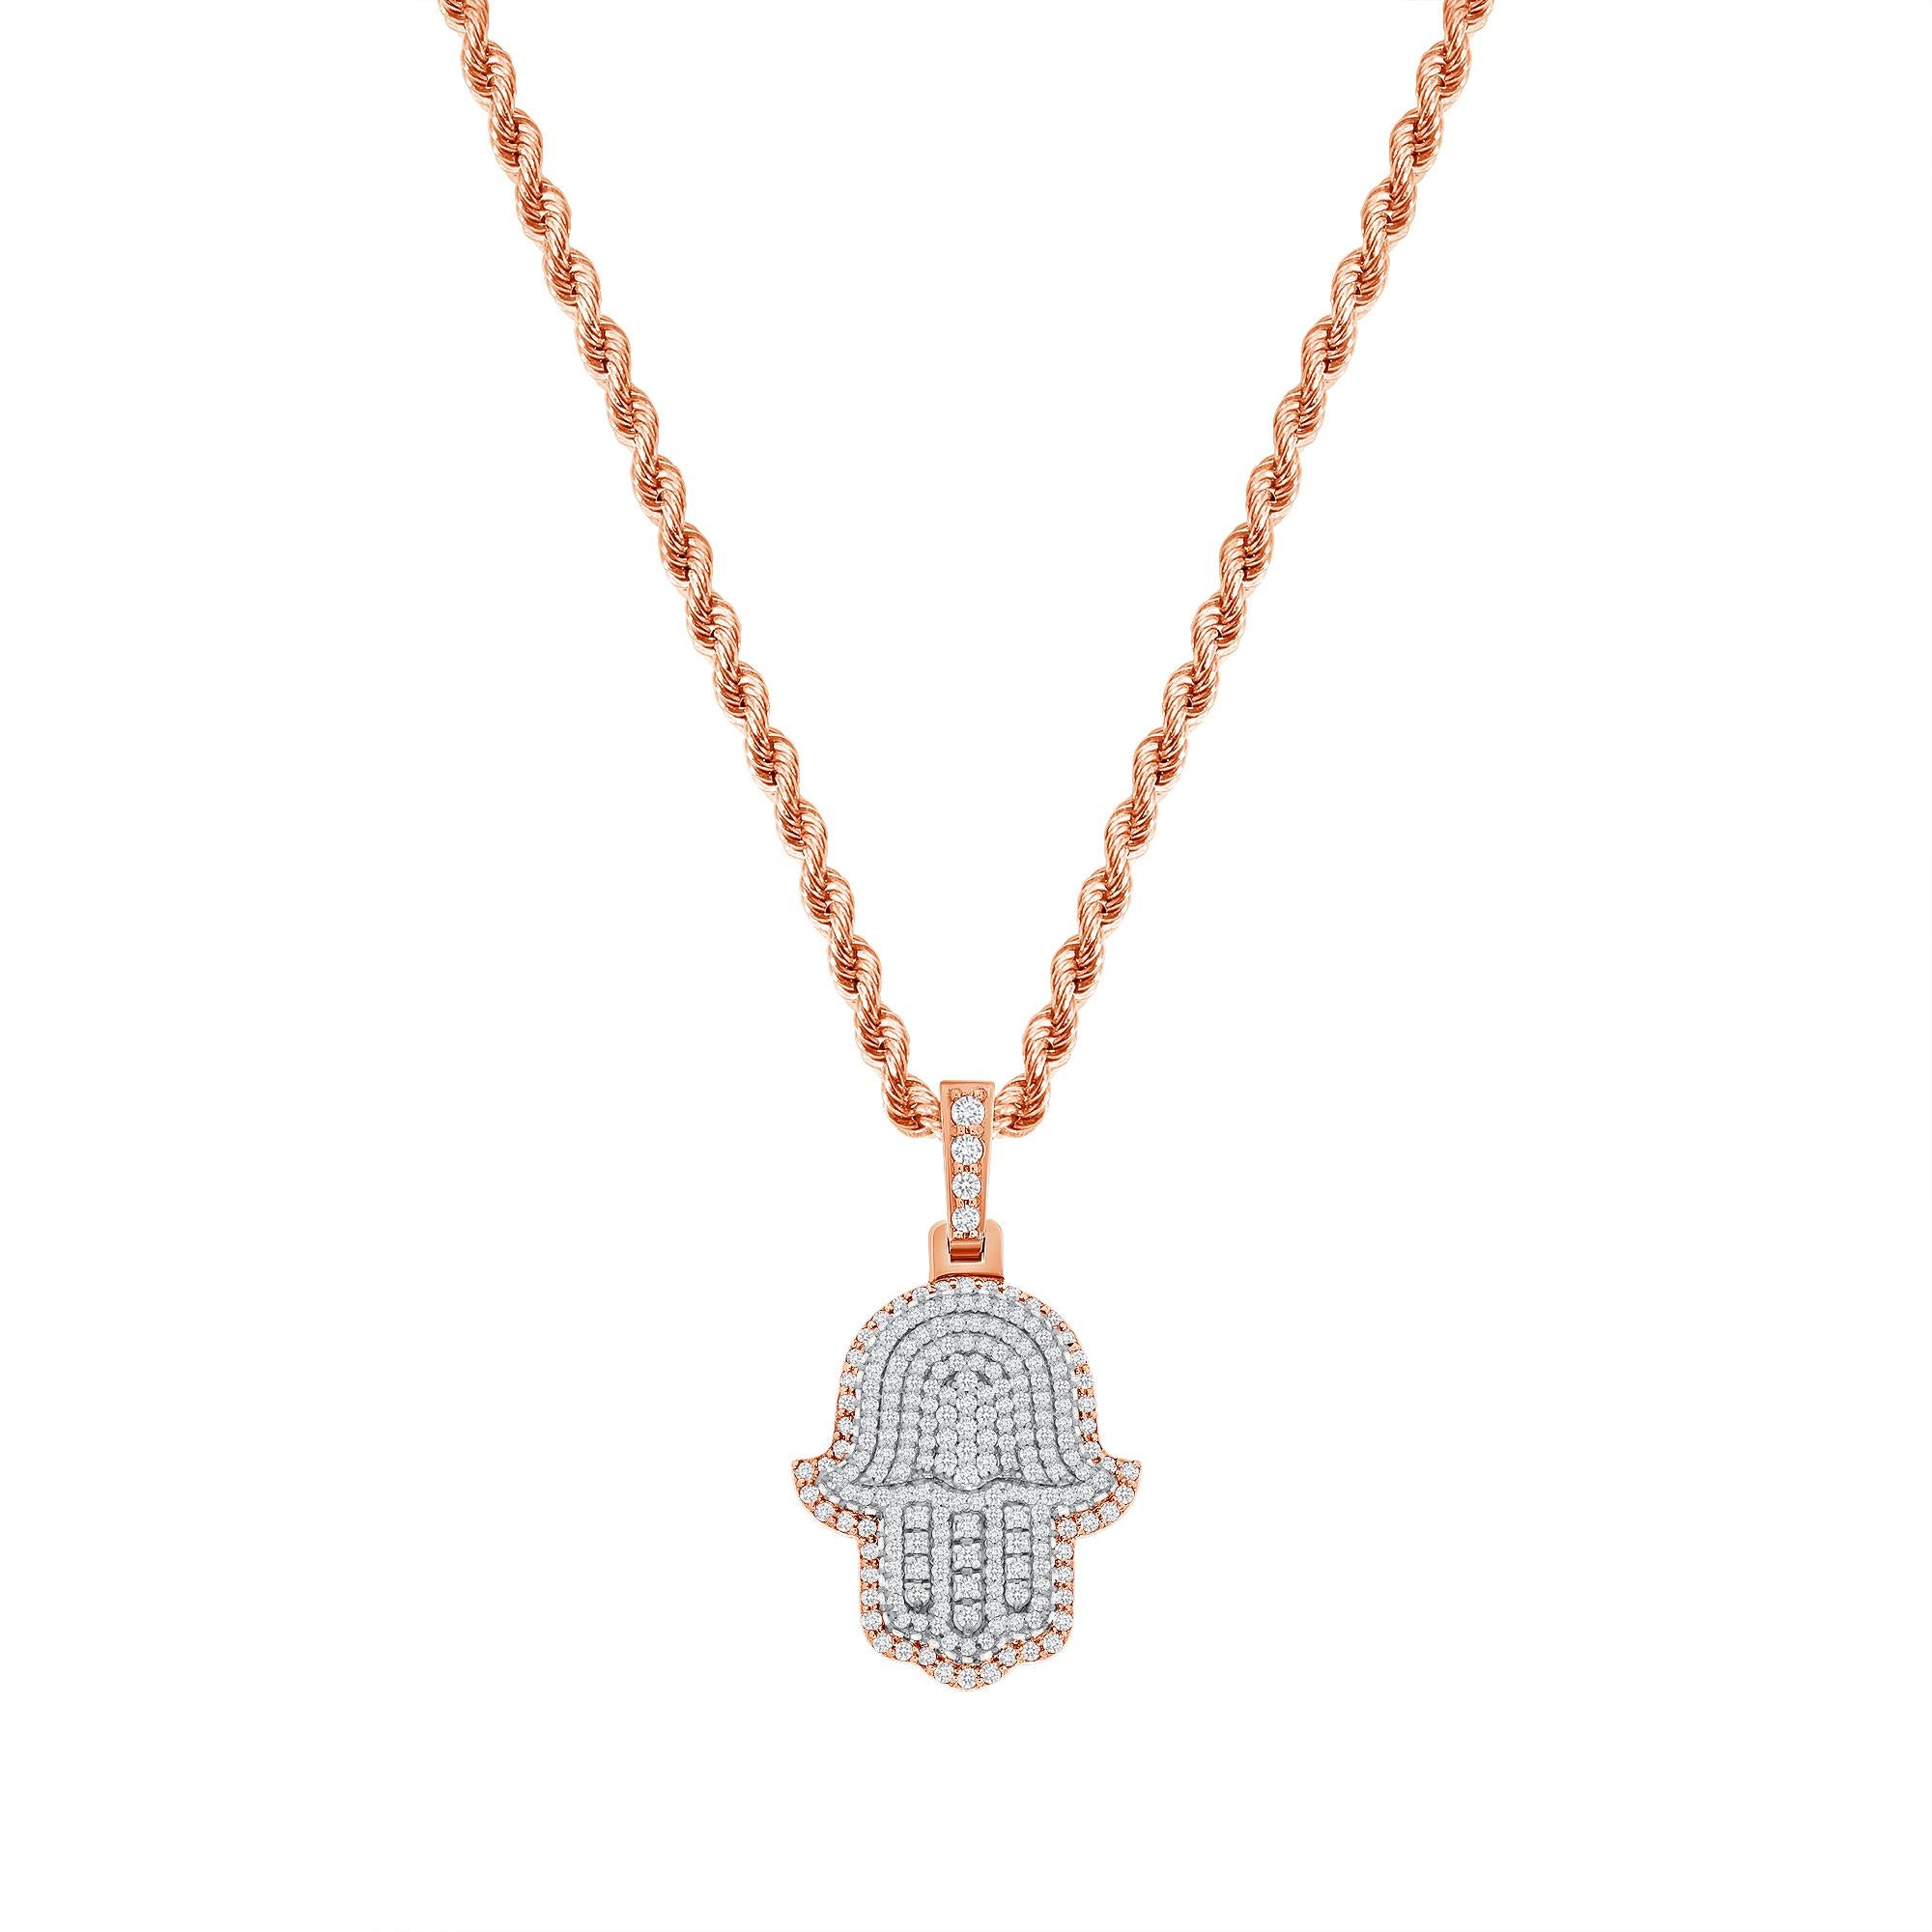 This Hamsa diamond necklace provides both a spiritual and fashionable on trend look. 

Metal: 14k Gold
Diamond Cut: Round
Total Diamond Carats: 2 Carats
Diamond Clarity: VS
Diamond Color: F-G
Necklace Length: 18 Inches
Color: Rose Gold
